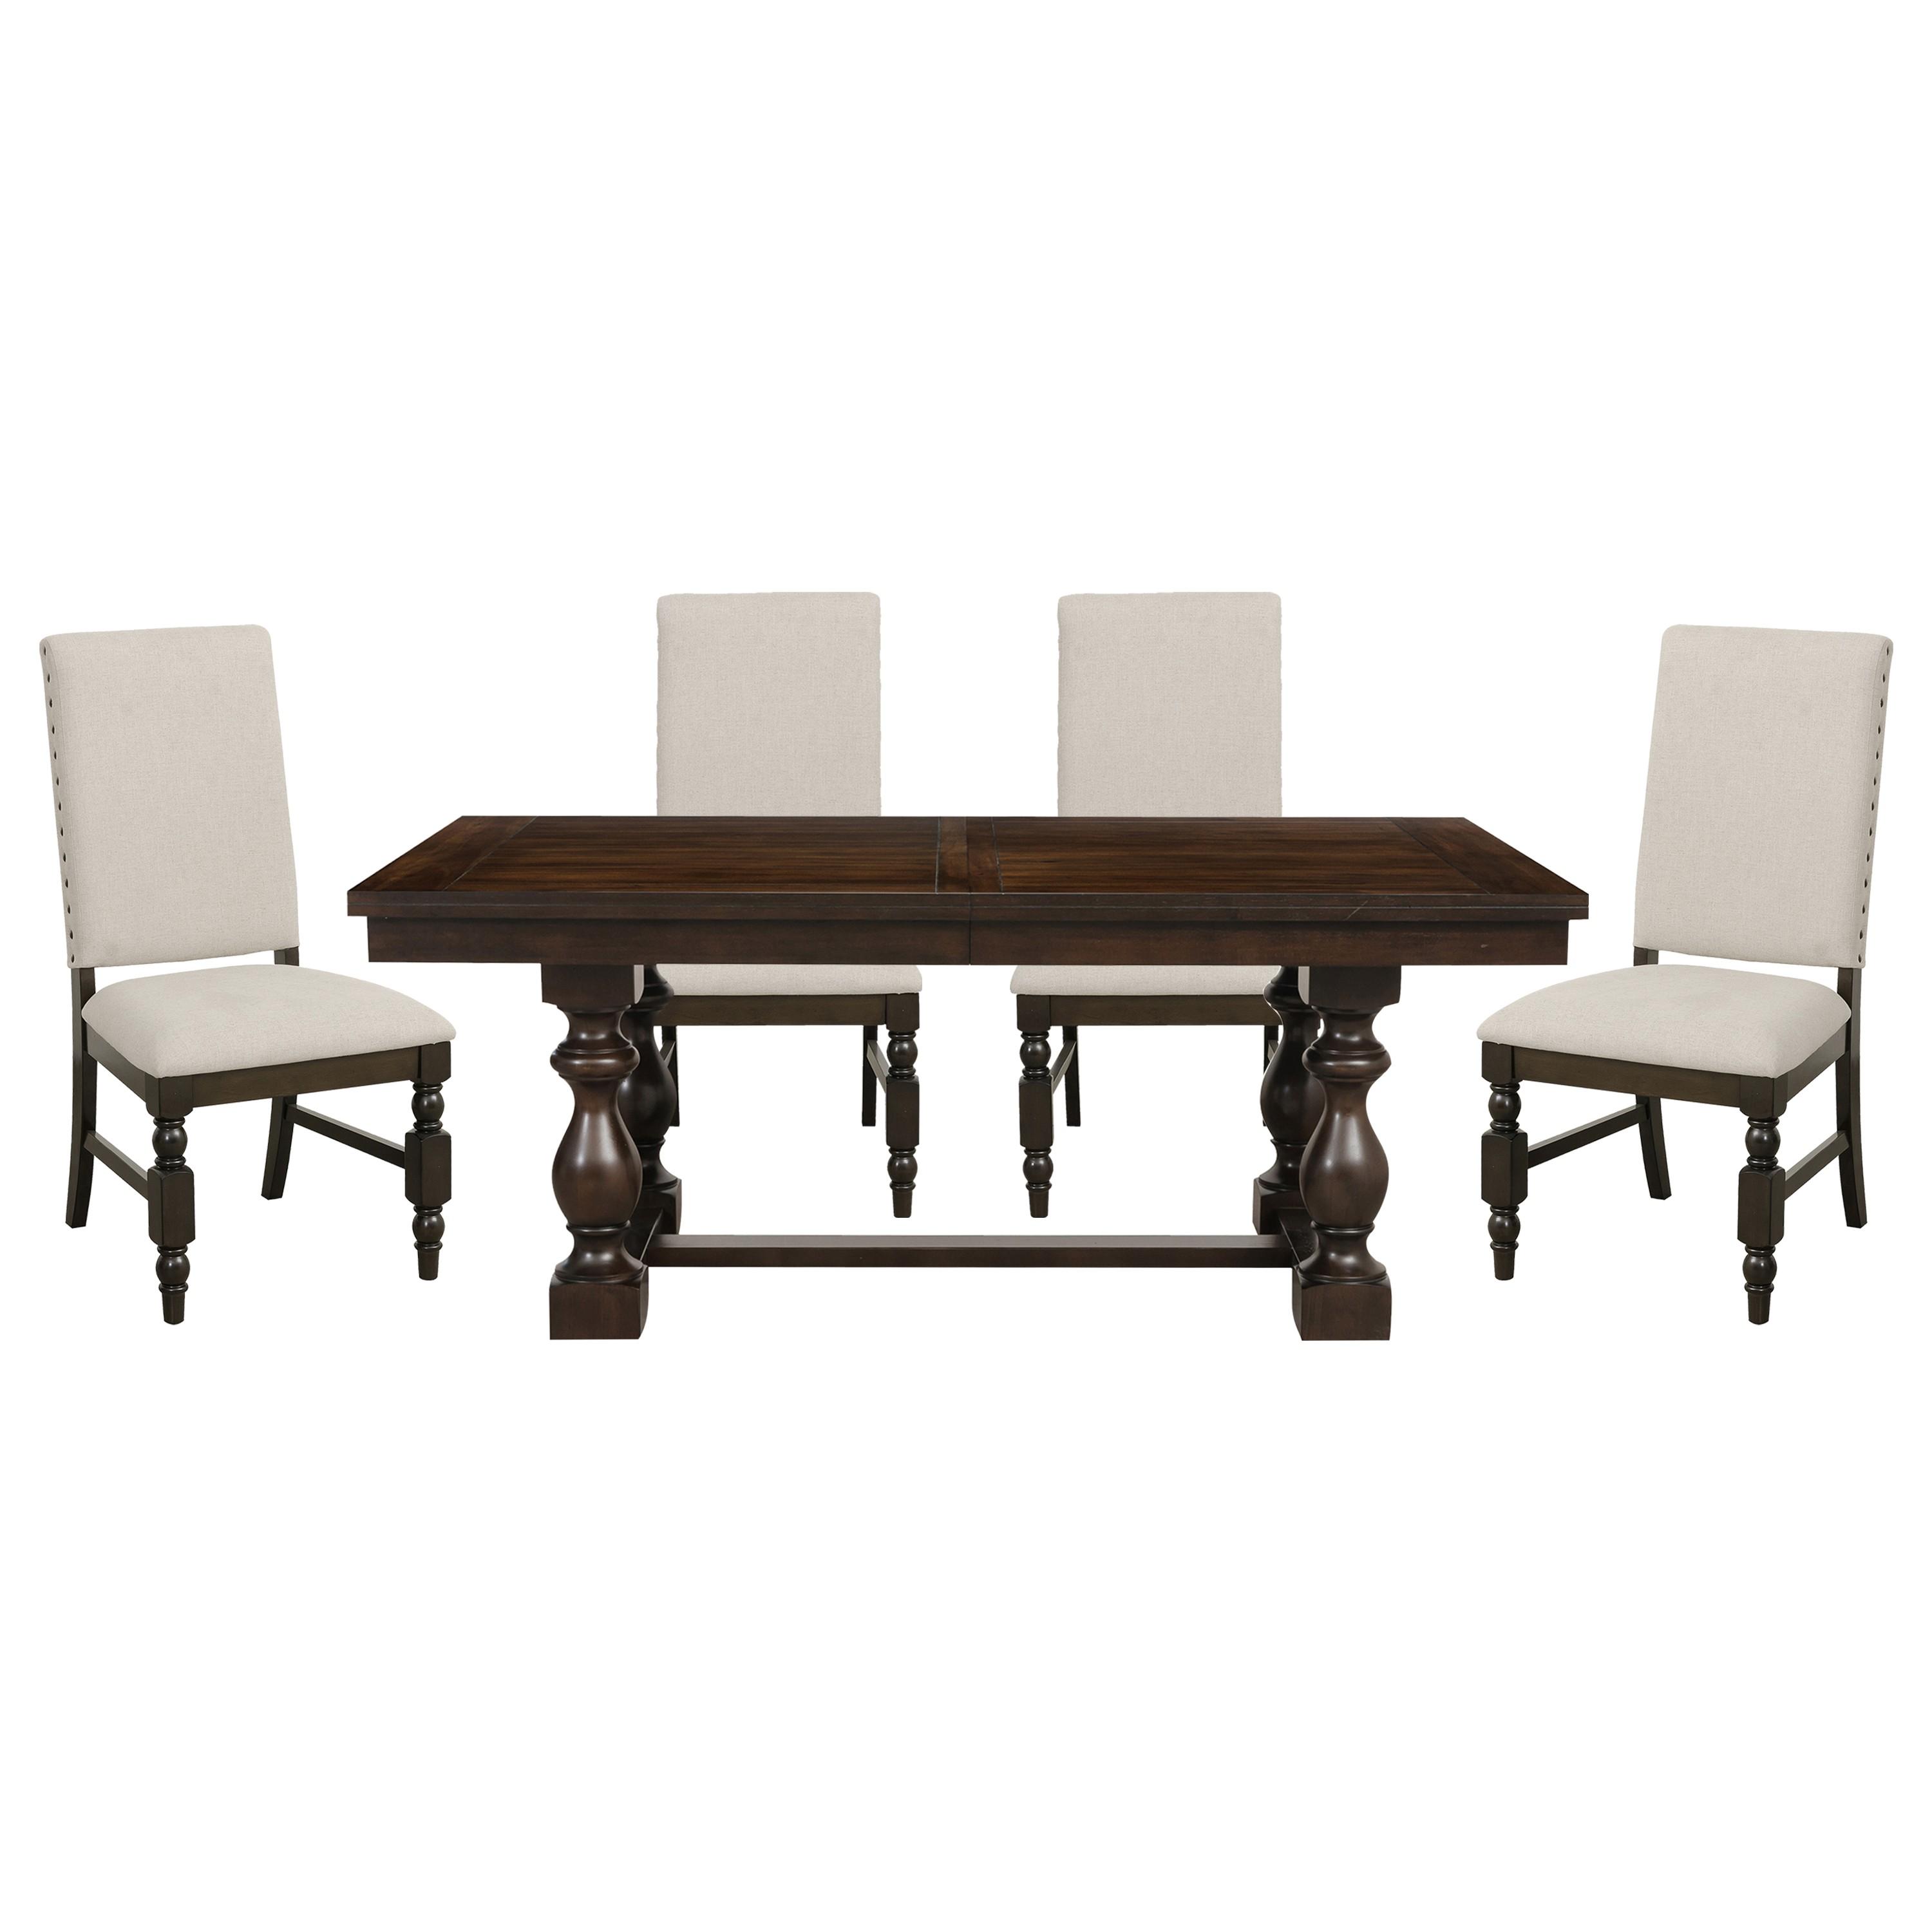 Traditional Dining Room Set 5167-96*5PC Yates 5167-96*5PC in Dark Oak Polyester